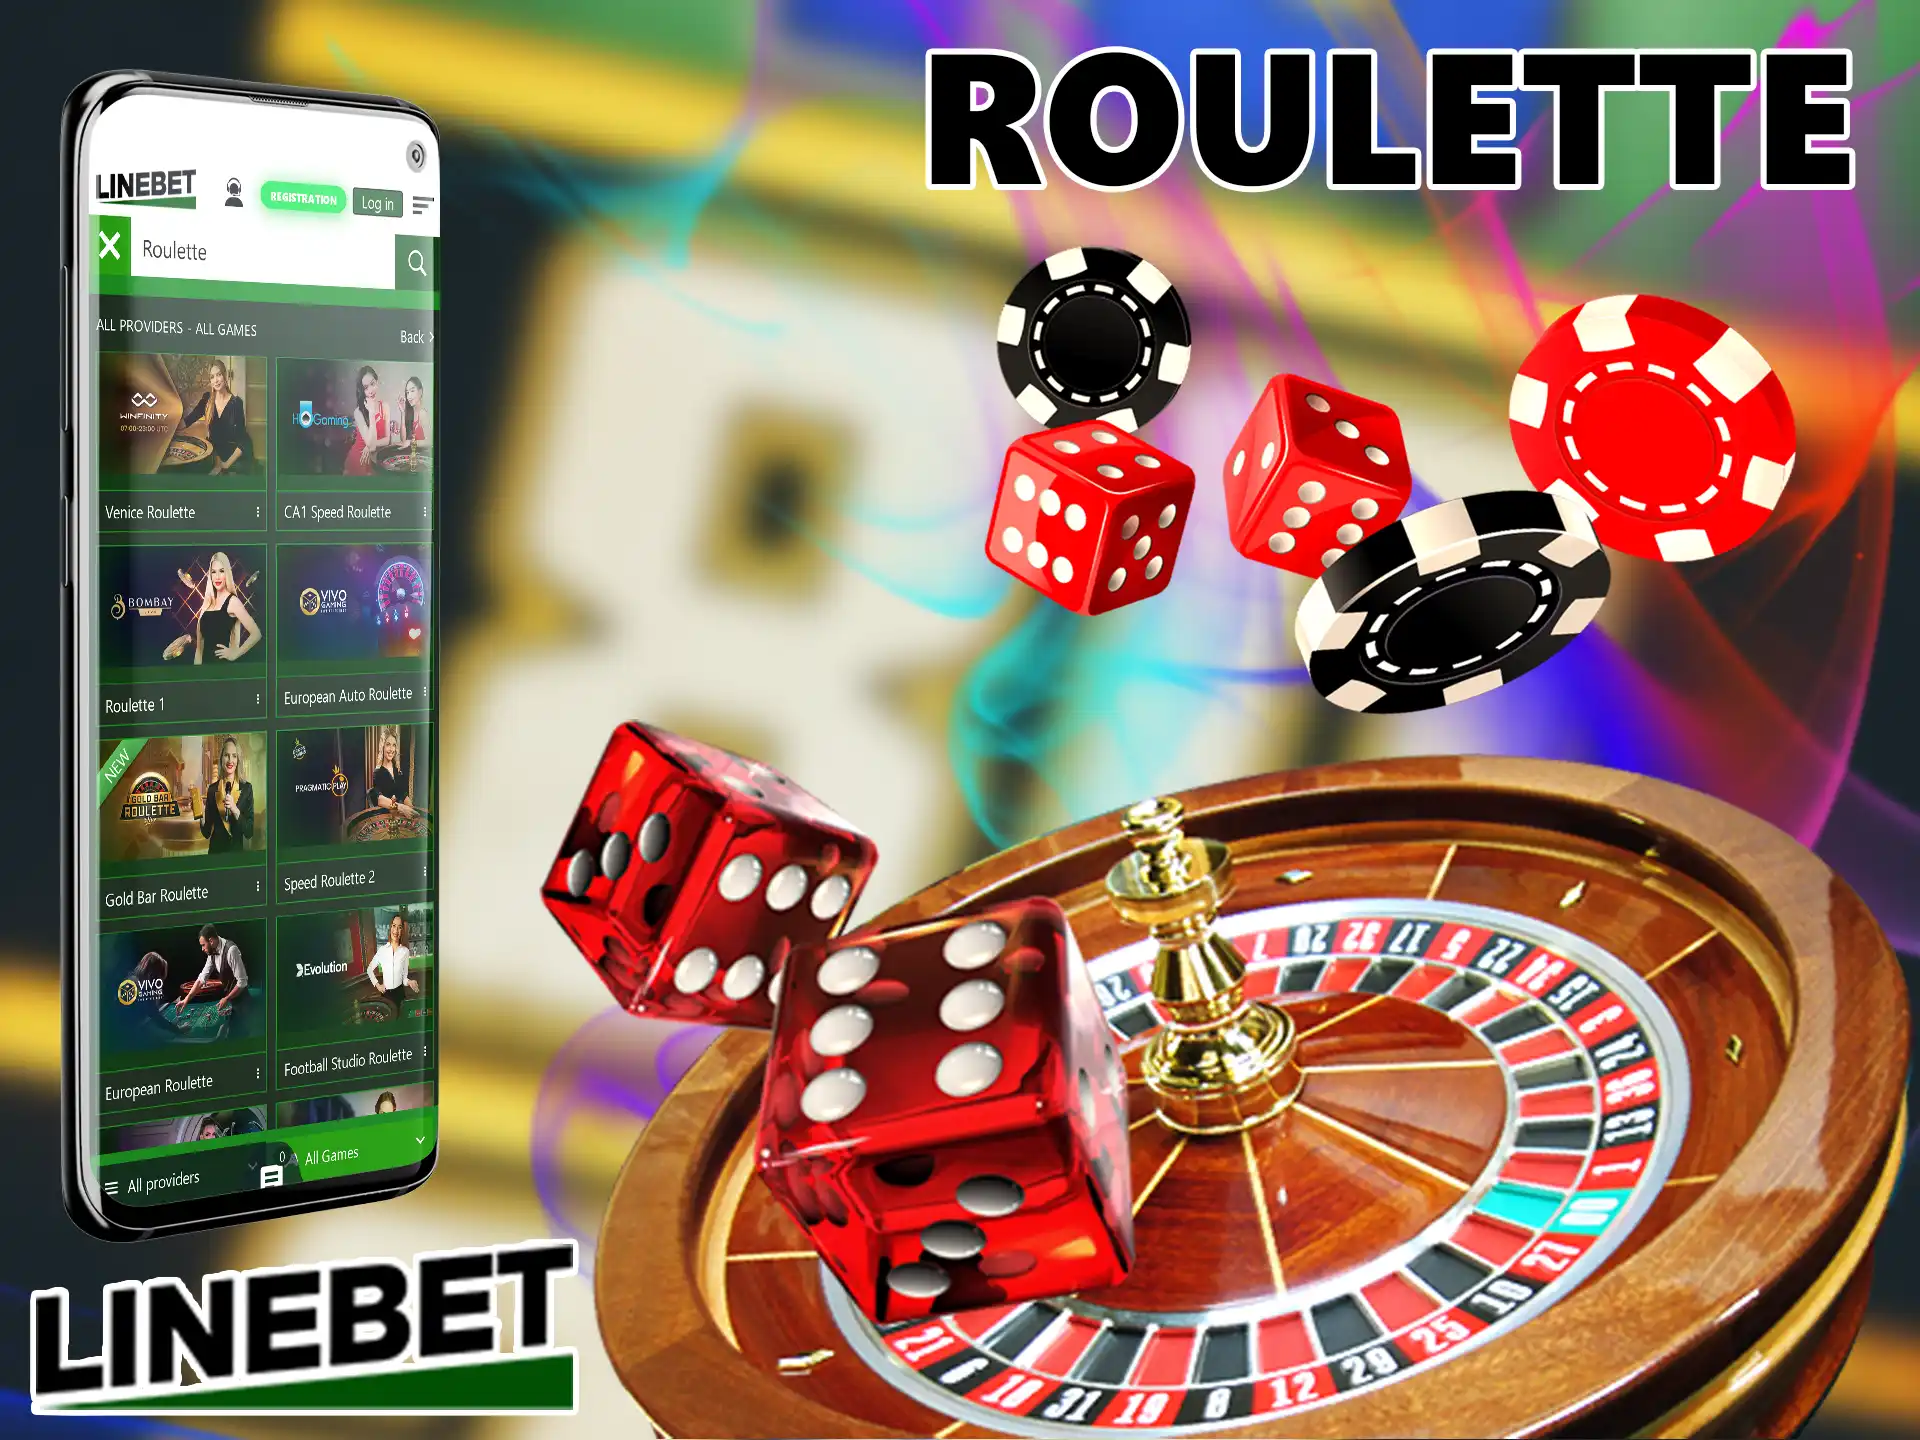 The main rule for this wonderful game at Linebet Casino is to anticipate the colours you are going to get and to keep your eye on the ball as it moves around the wheel.